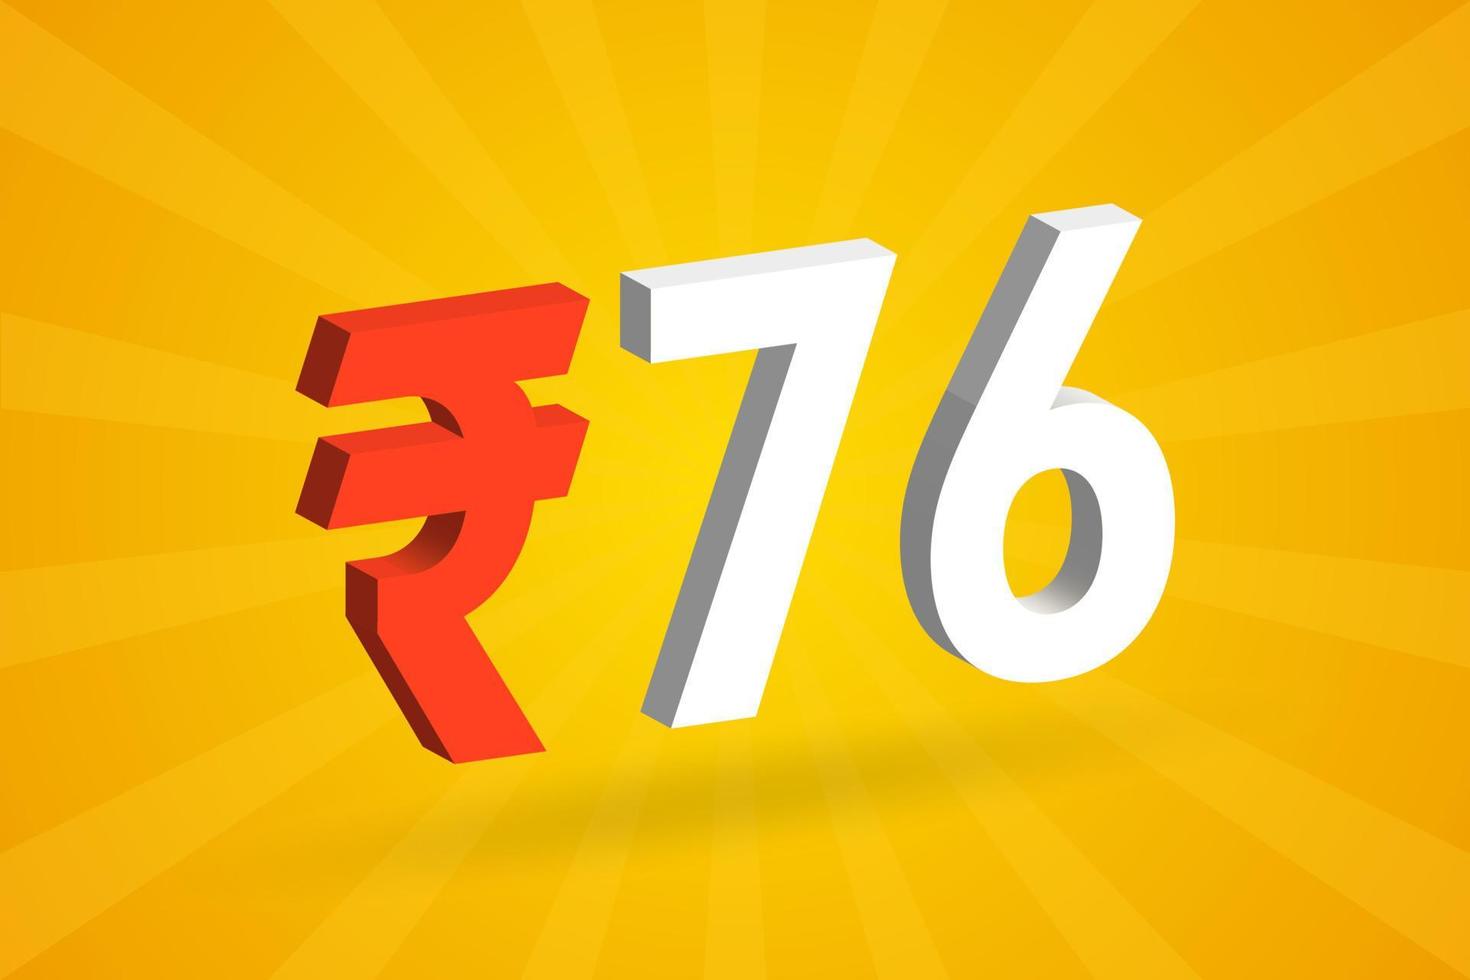 76 Rupee 3D symbol bold text vector image. 3D 76 Indian Rupee currency sign vector illustration